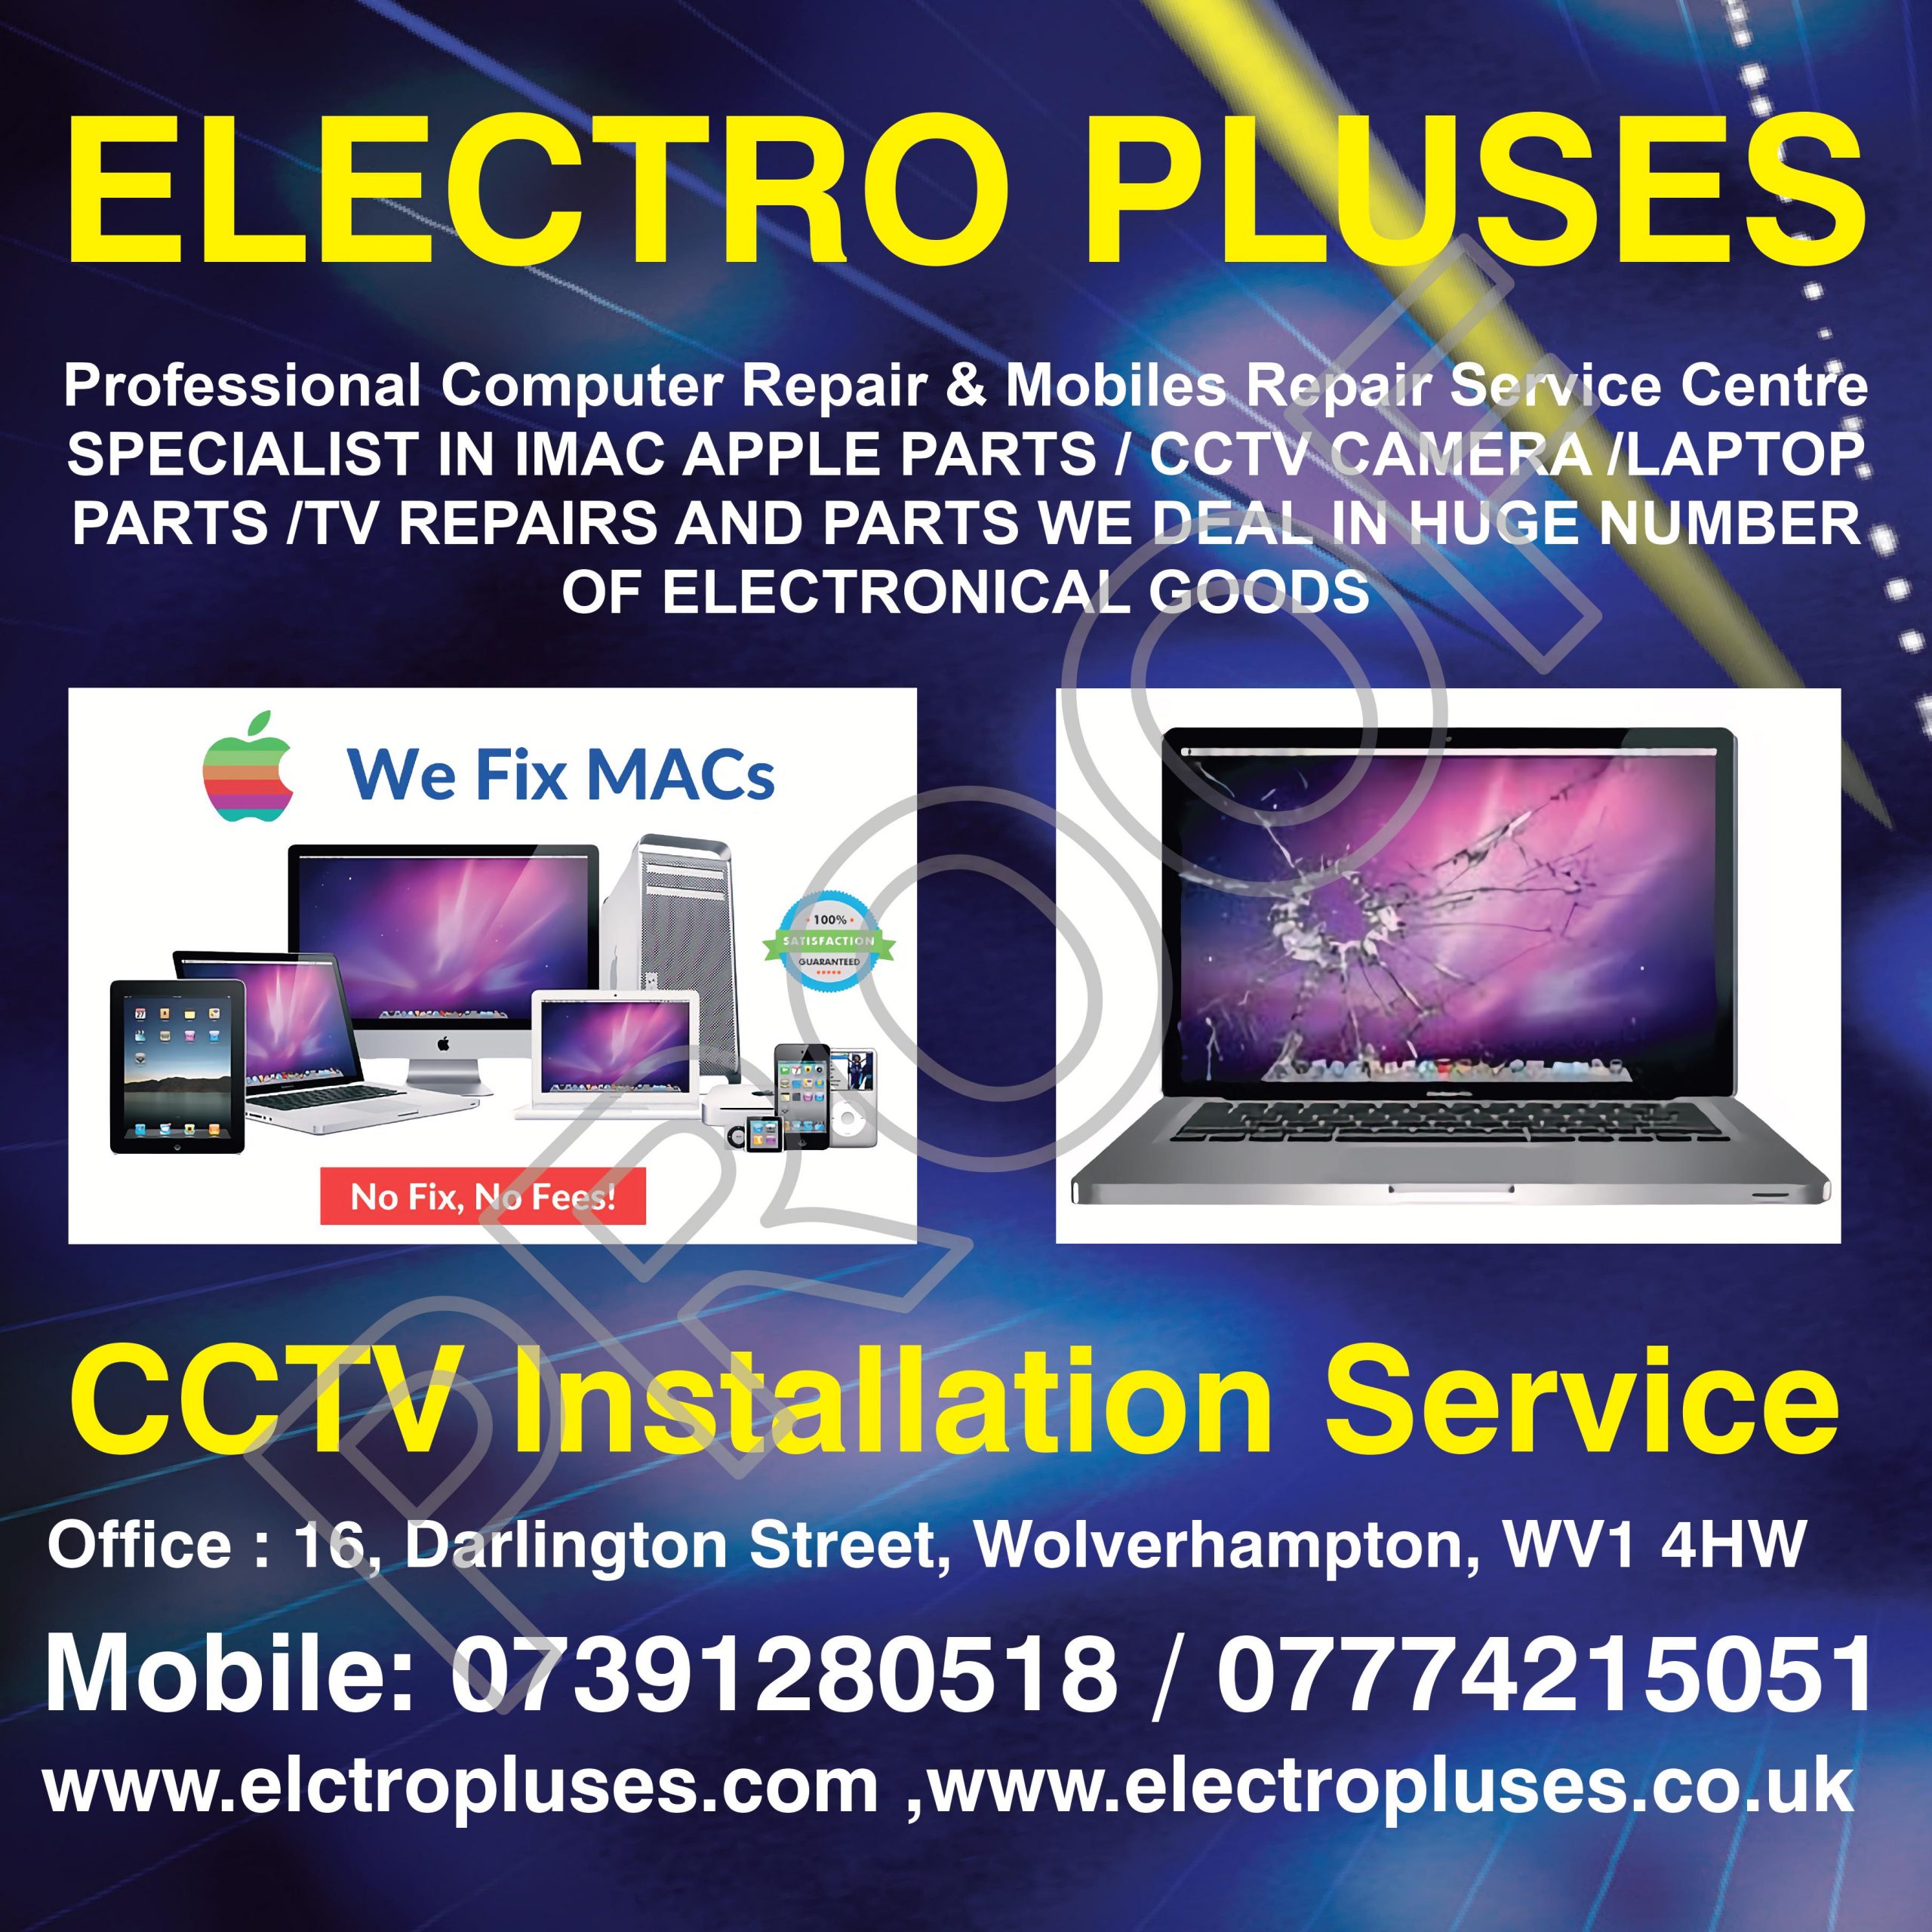 Electro Pluses Computer is an Established Birmingham based company New Branch Opening in Wolverhampton “2022” 07391280518 post thumbnail image